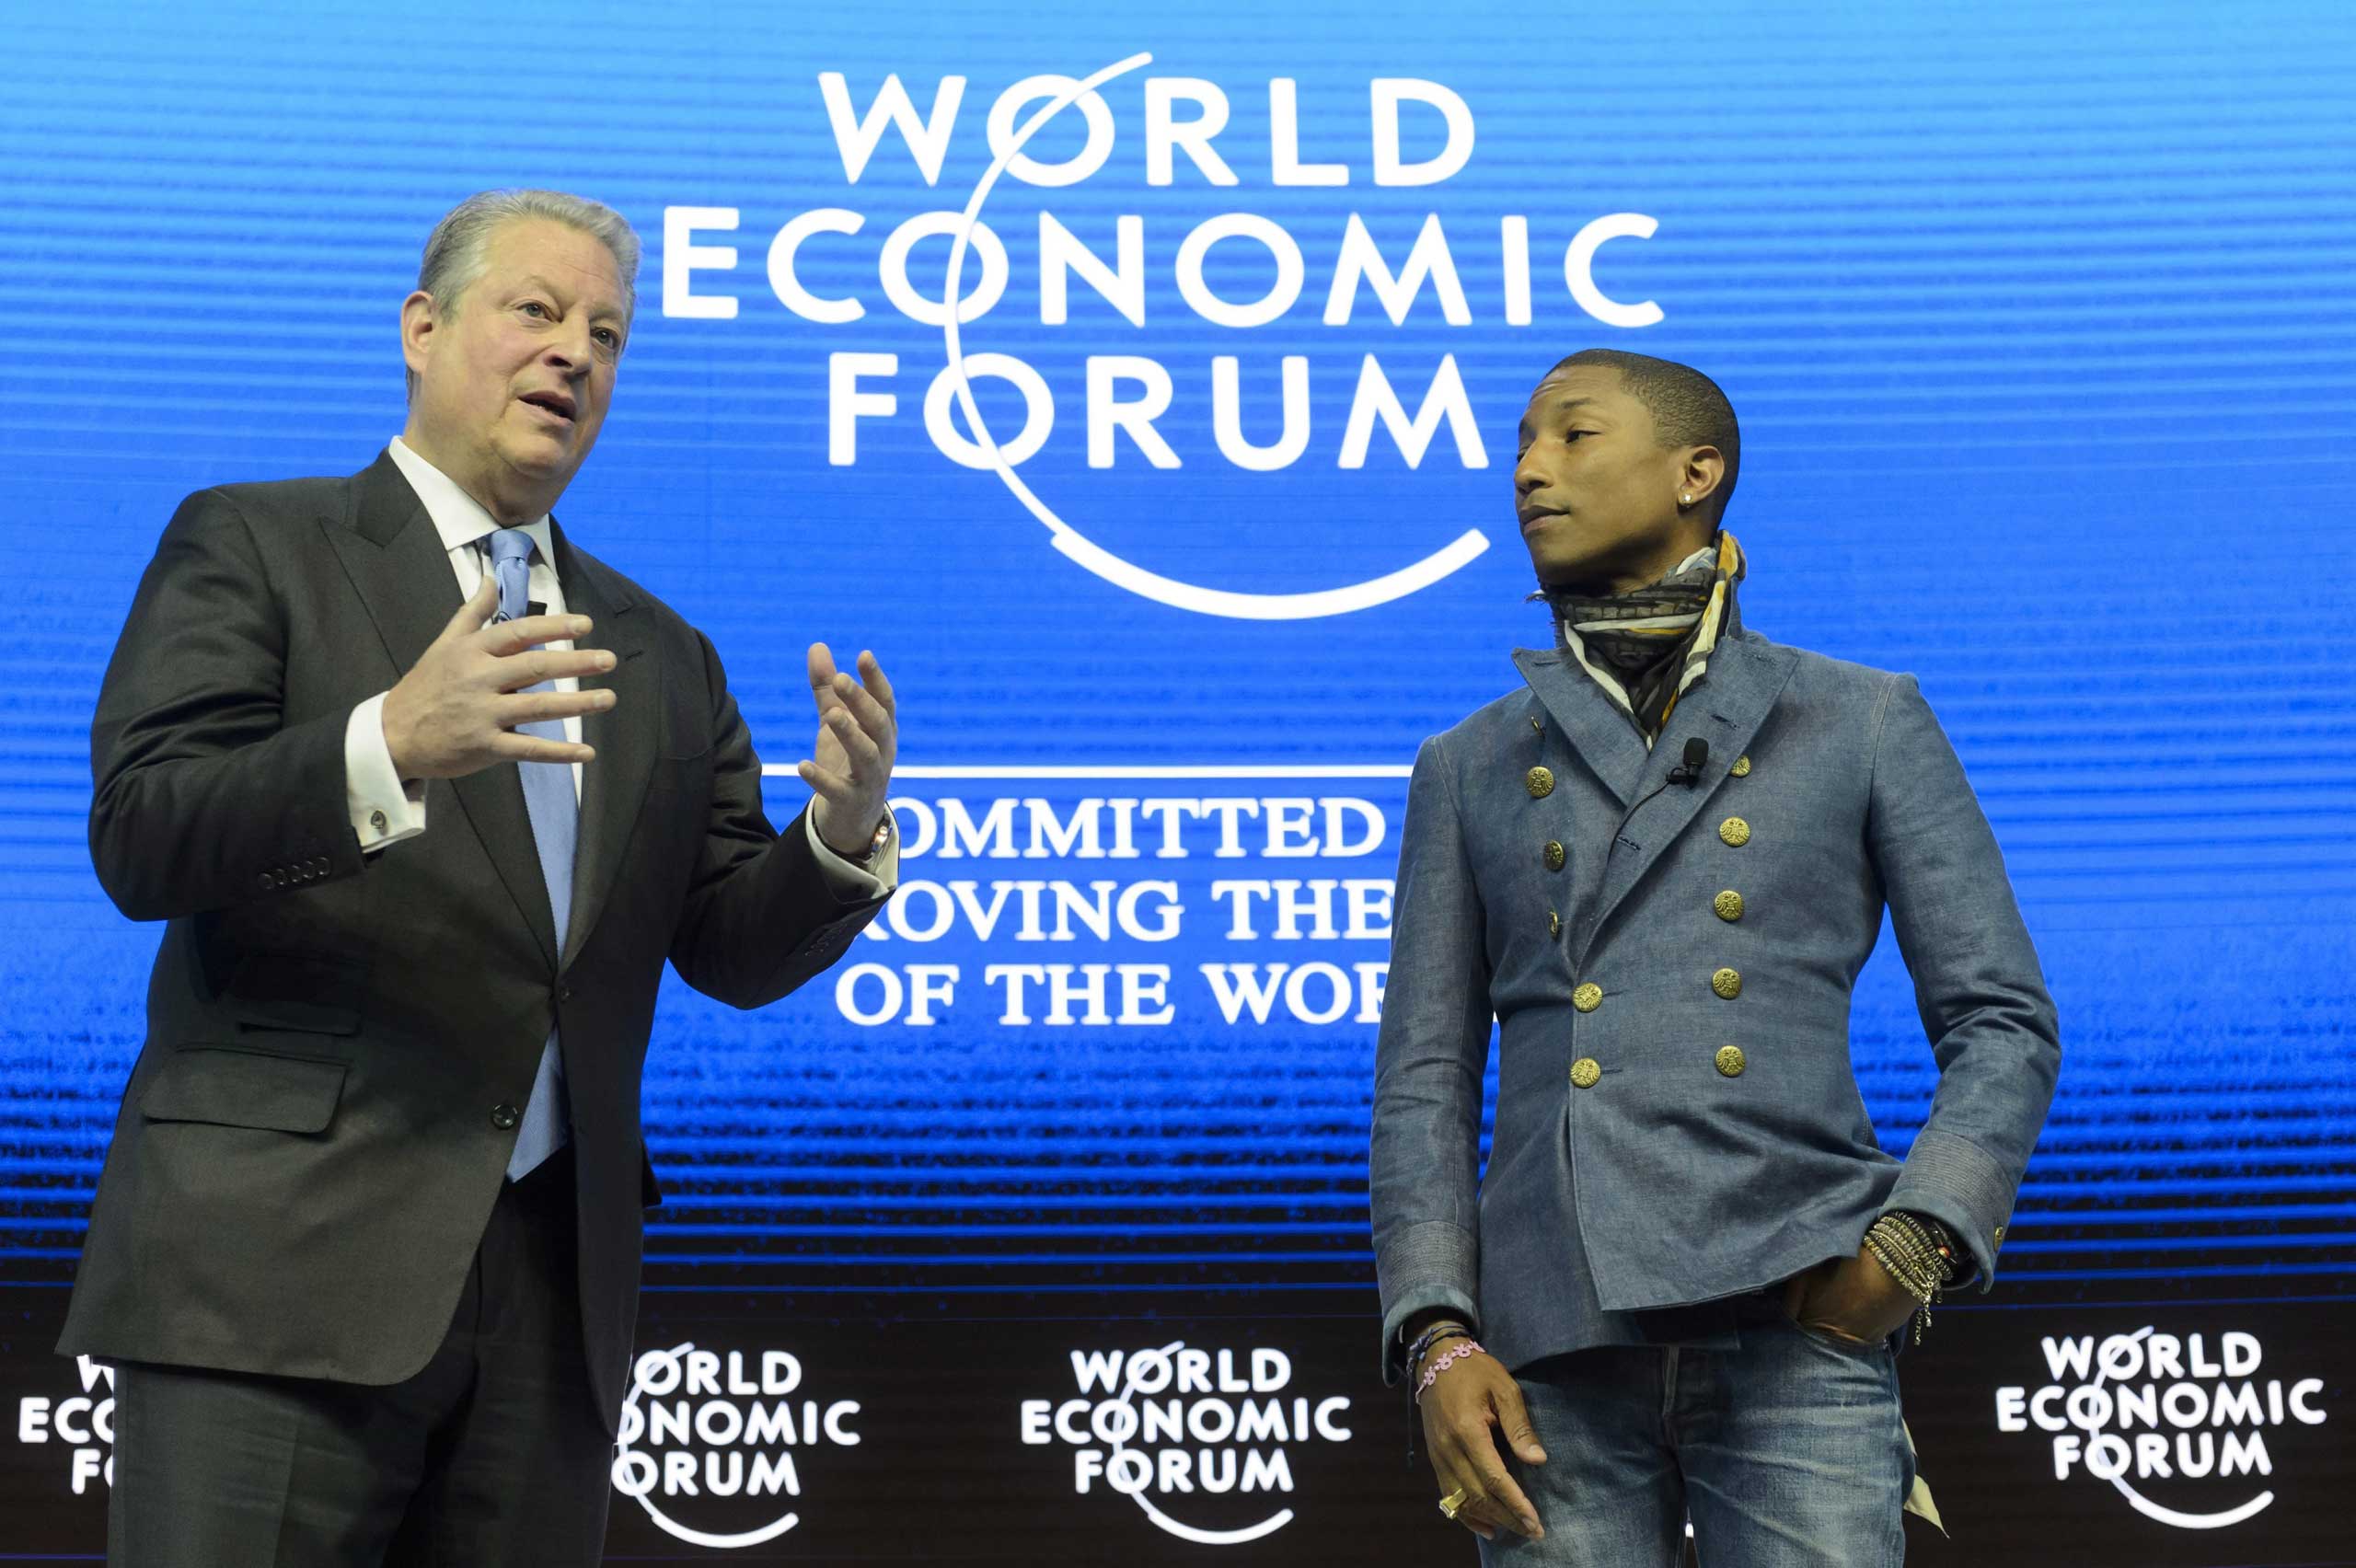 Former U.S. Vice President Al Gore speaks next to rapper Pharrell Williams during a panel session on the first day of the 45th Annual Meeting of the World Economic Forum, in Davos, Jan. 21, 2015. (Laurent Gillieron—EPA)